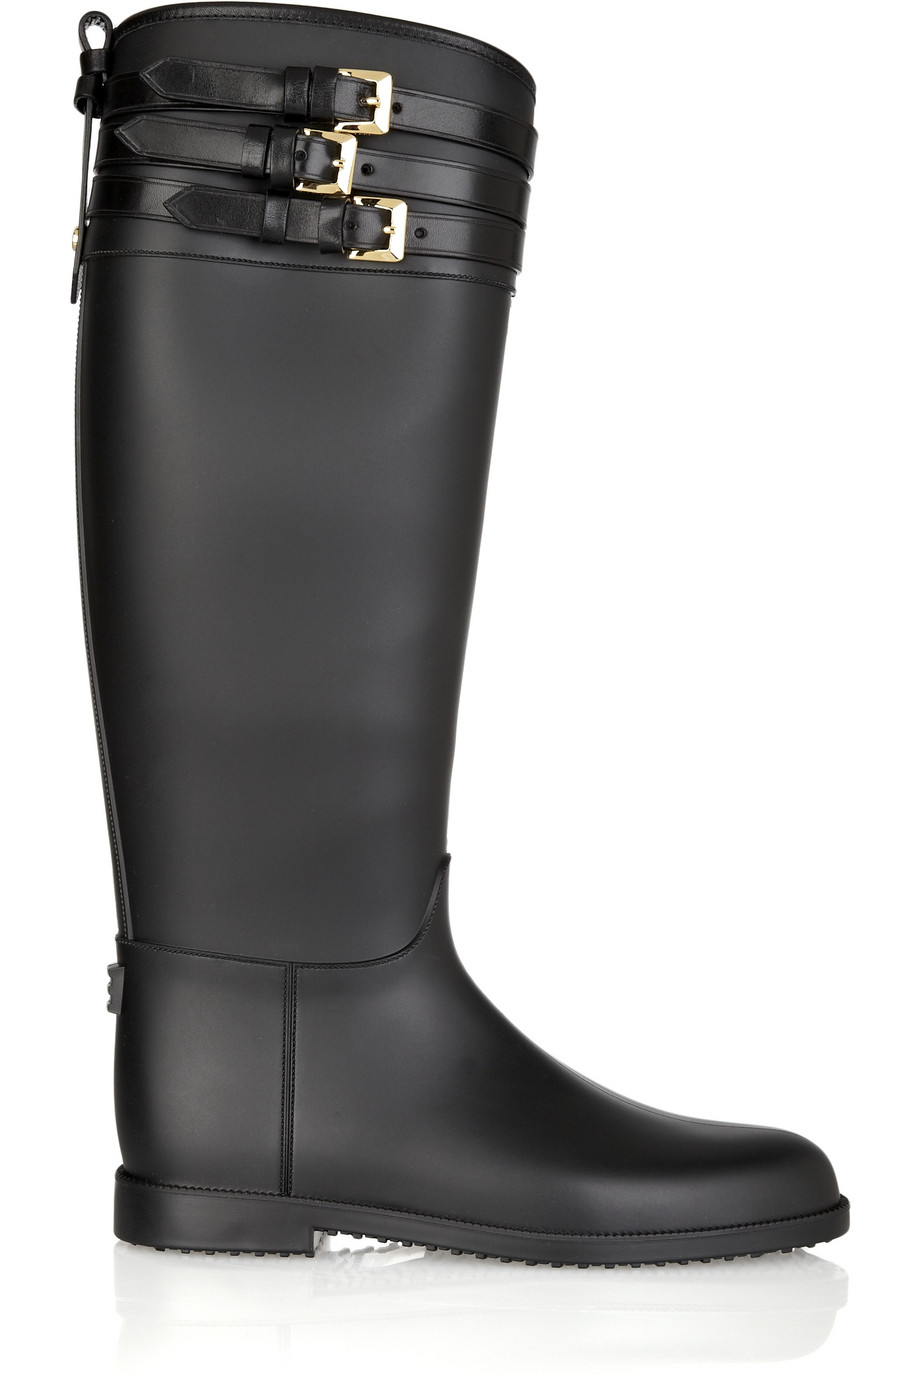 Lyst - Burberry Buckle-embellished Rubber Boots in Black